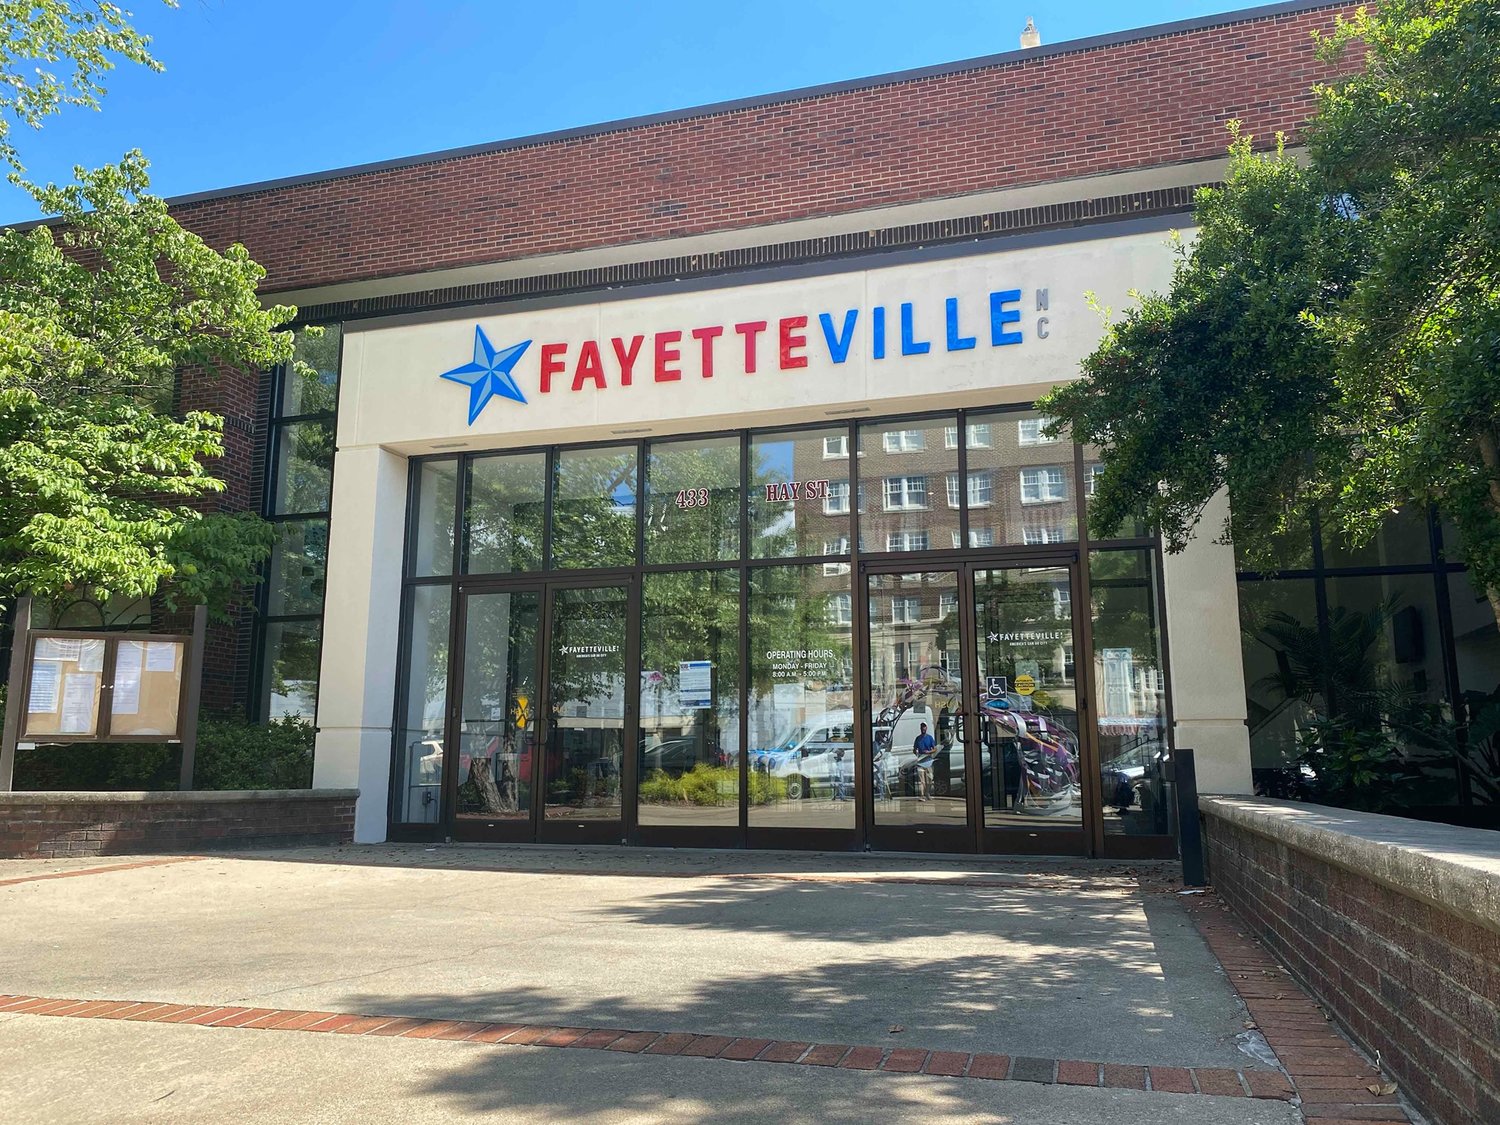 The Fayetteville City Council's first budget work session focused on salaries and an update on American Rescue Plan Act funding.